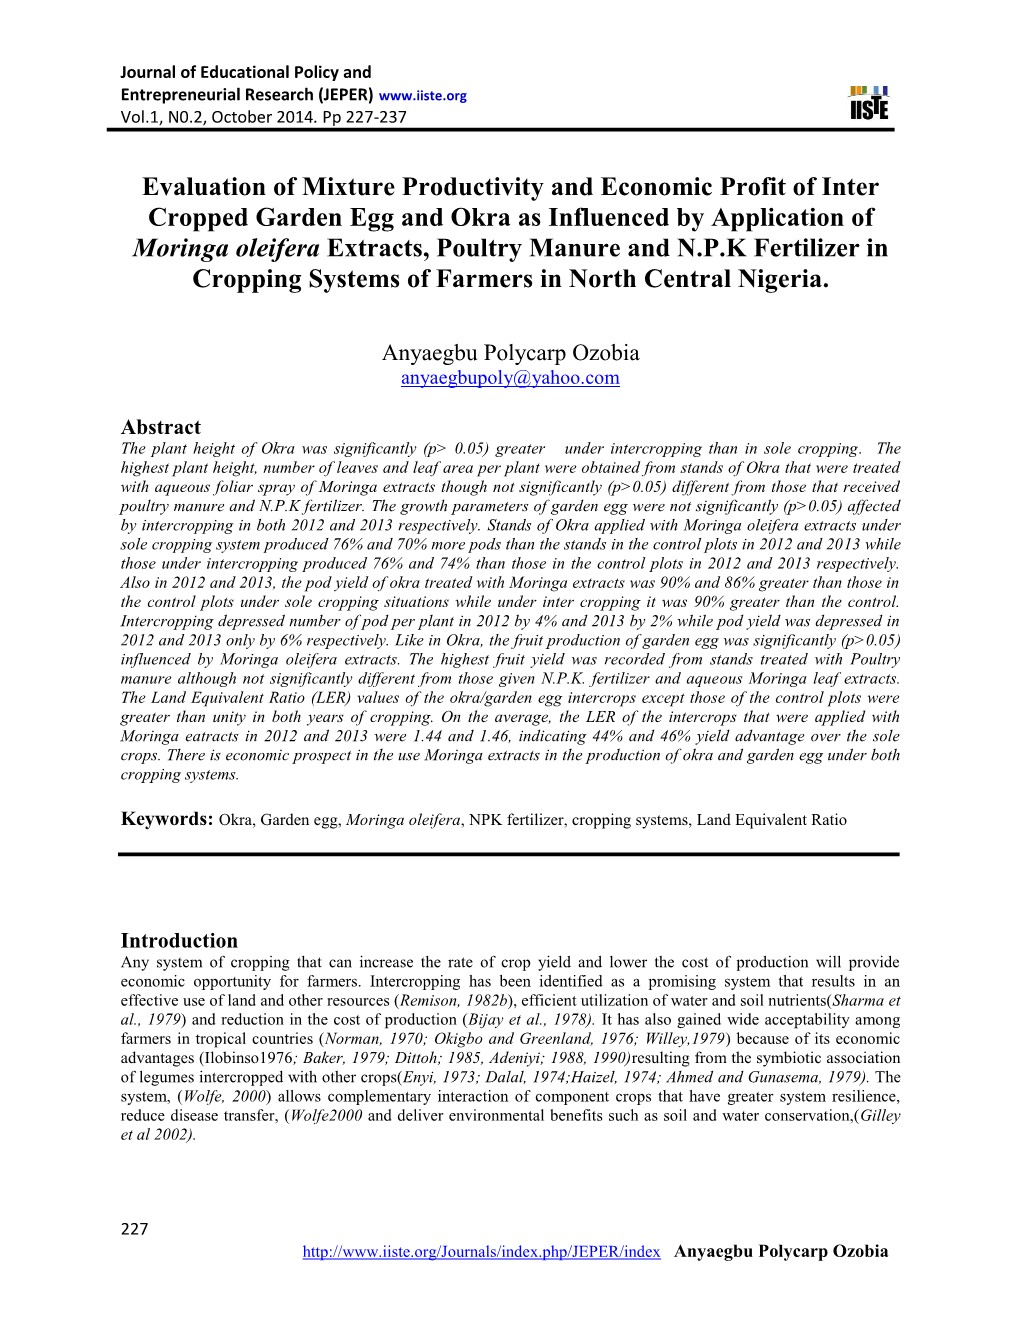 Evaluation of Mixture Productivity and Economic Profit of Inter Cropped